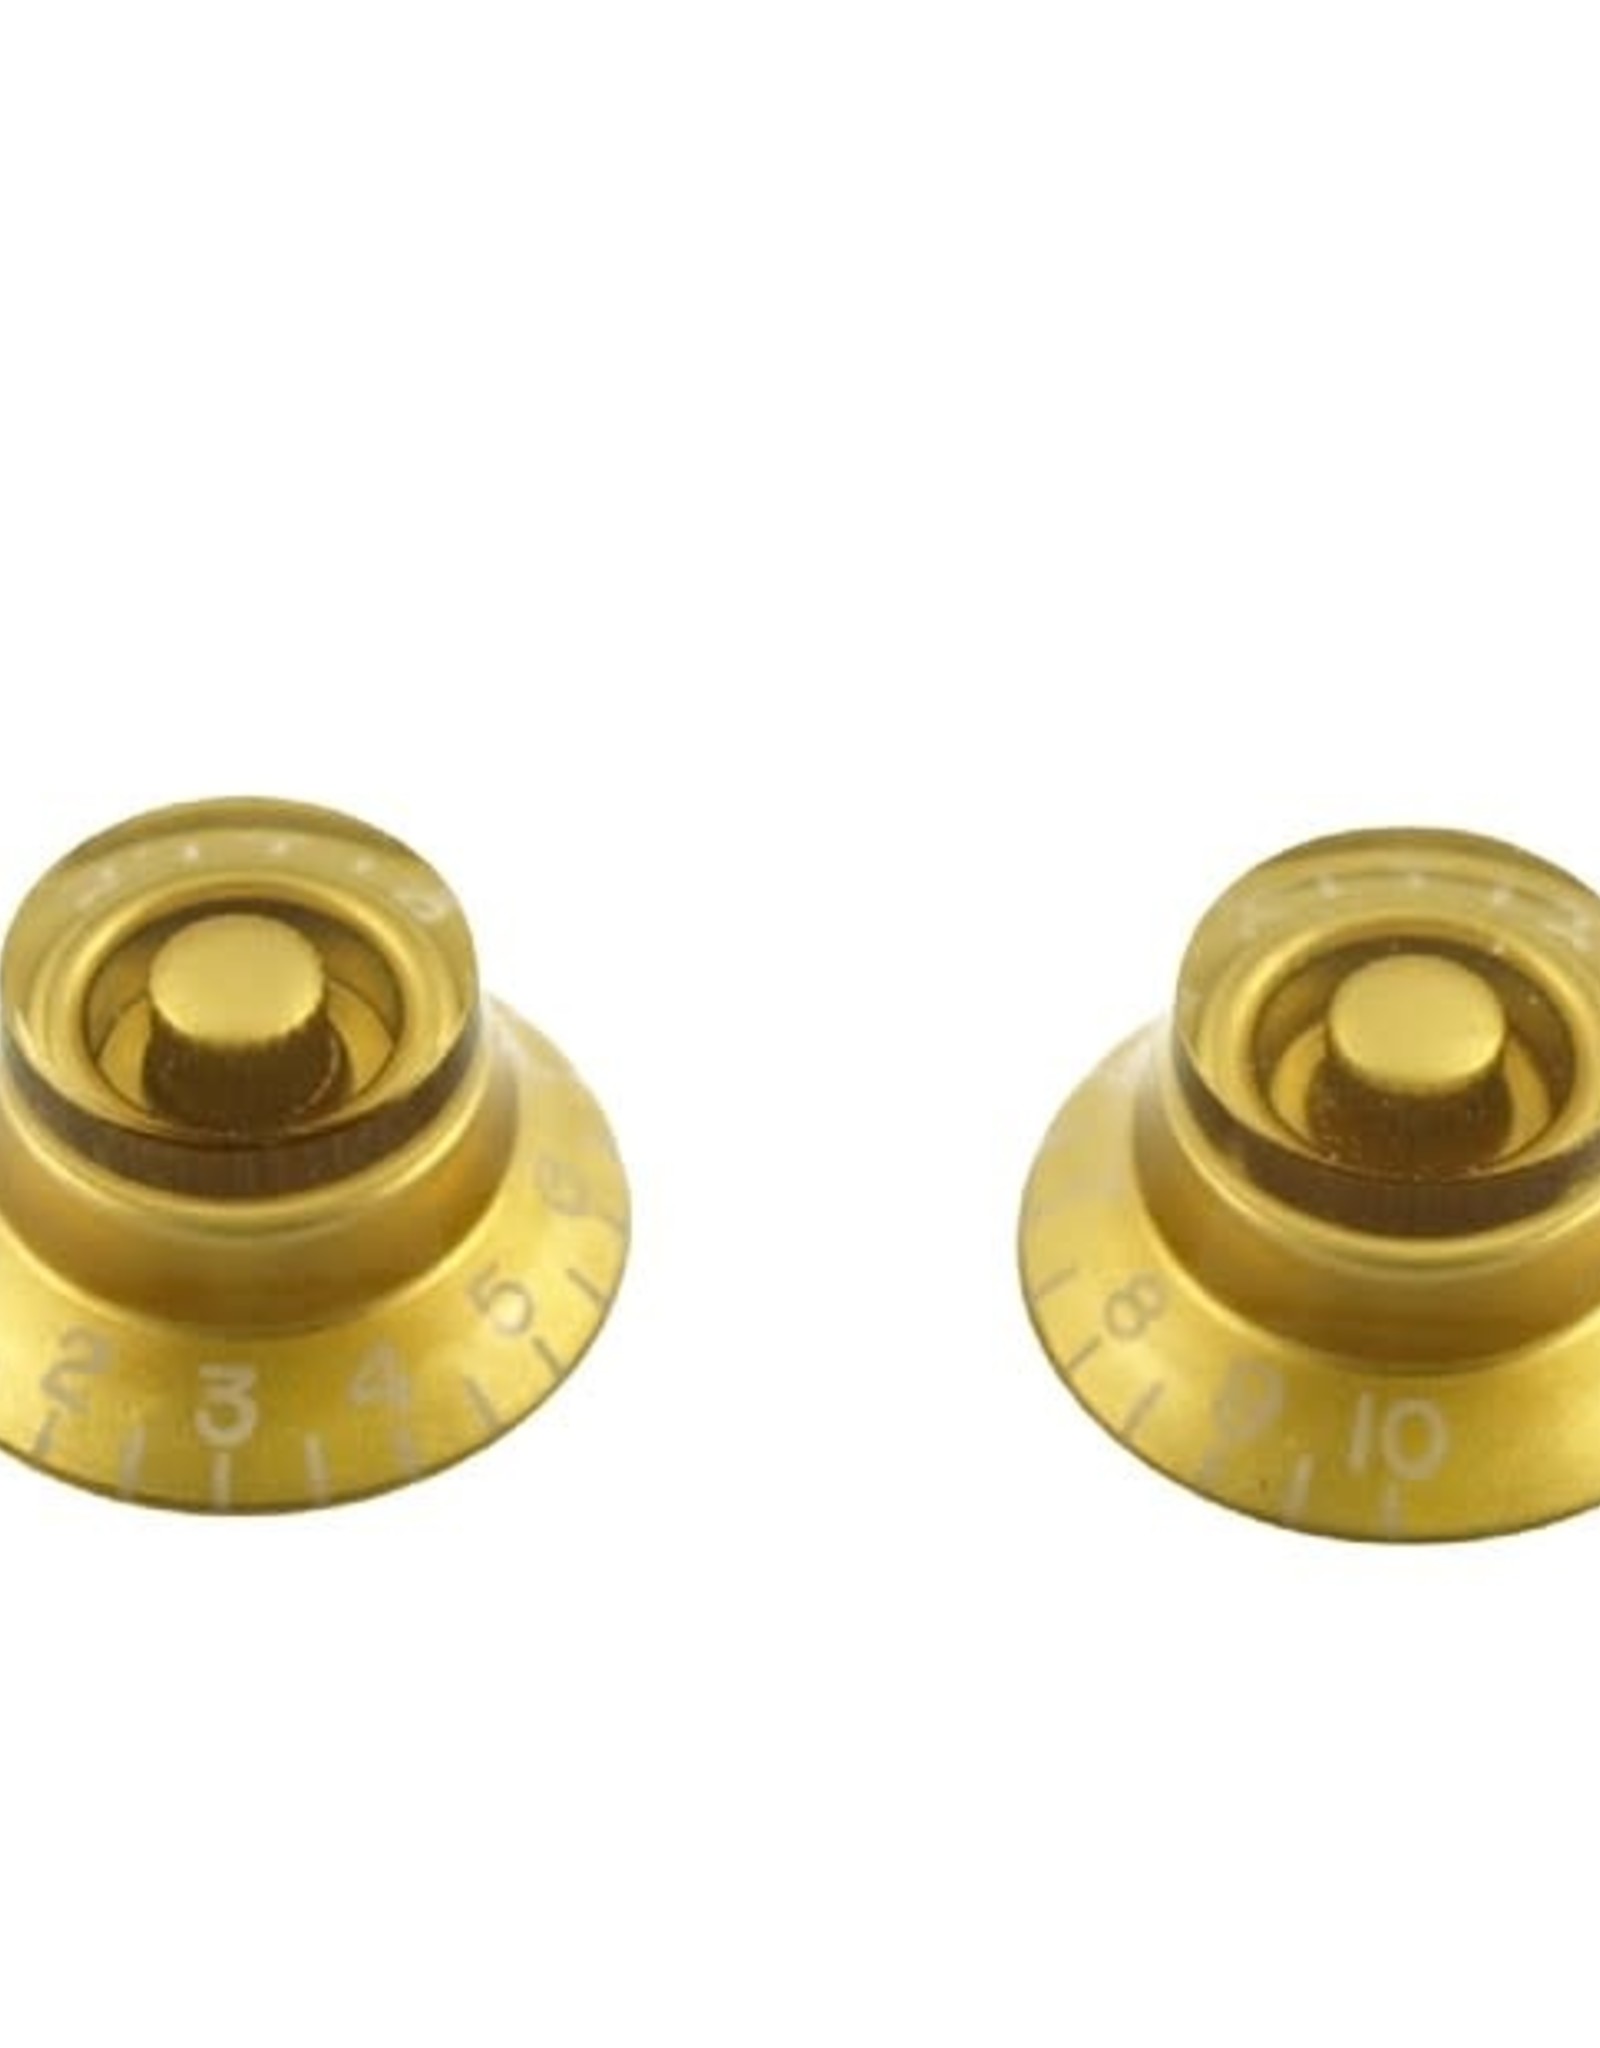 WD Music Products WD Bell Knob Set Of 2 Gold